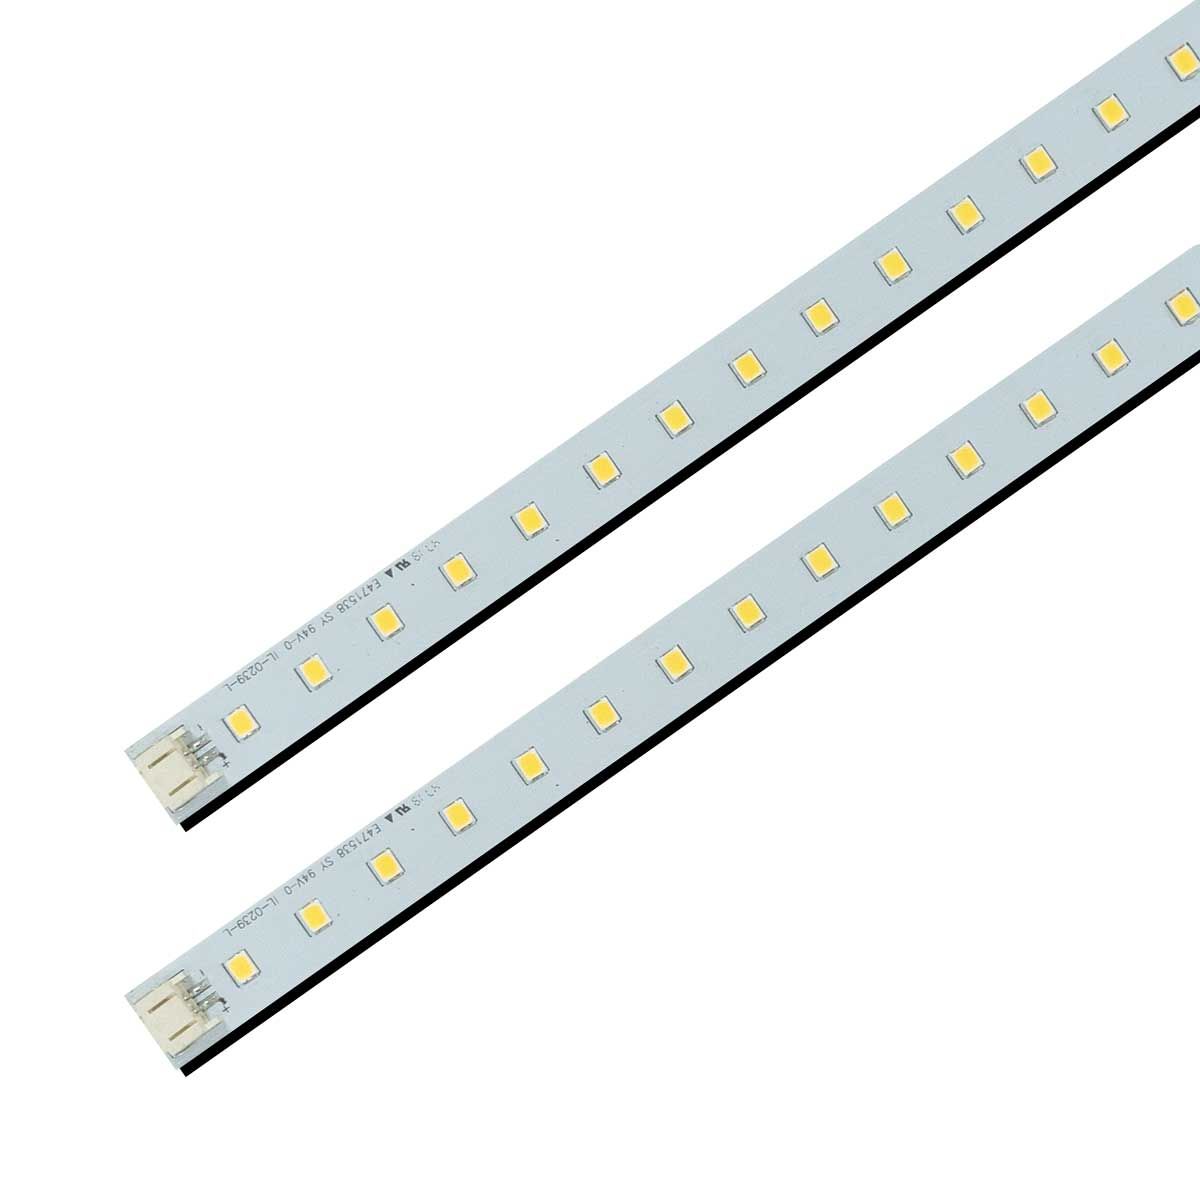 Fluorescent Lights To Led, Changing Fluorescent Light Bulb Cover